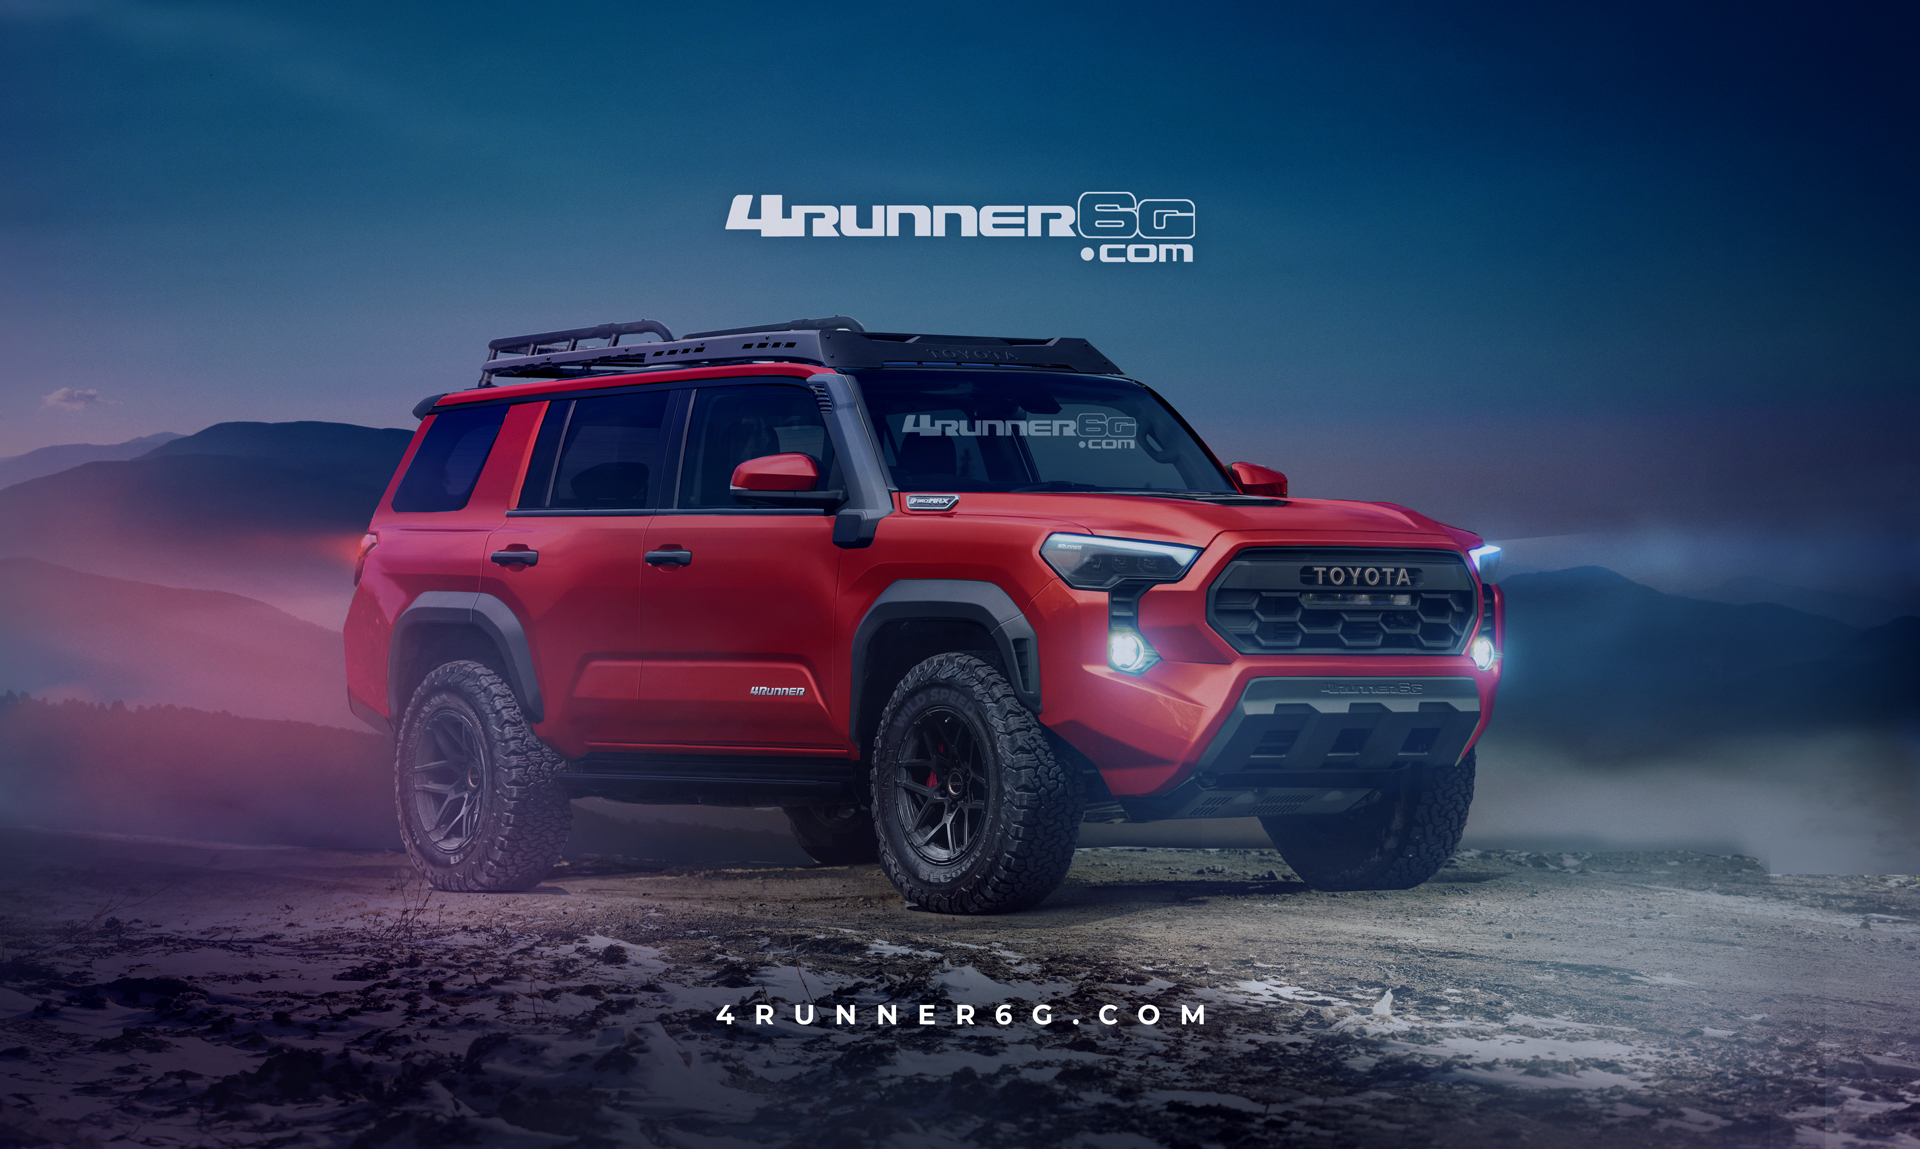 2025 Toyota 4runner 2025 4Runner (6th Gen) News, Specs, Engines, Release Date, Production Date & Preview Renderings -- Insider Info (as of 7/30/23) 2025 Toyota-4Runner-Front-ssRed